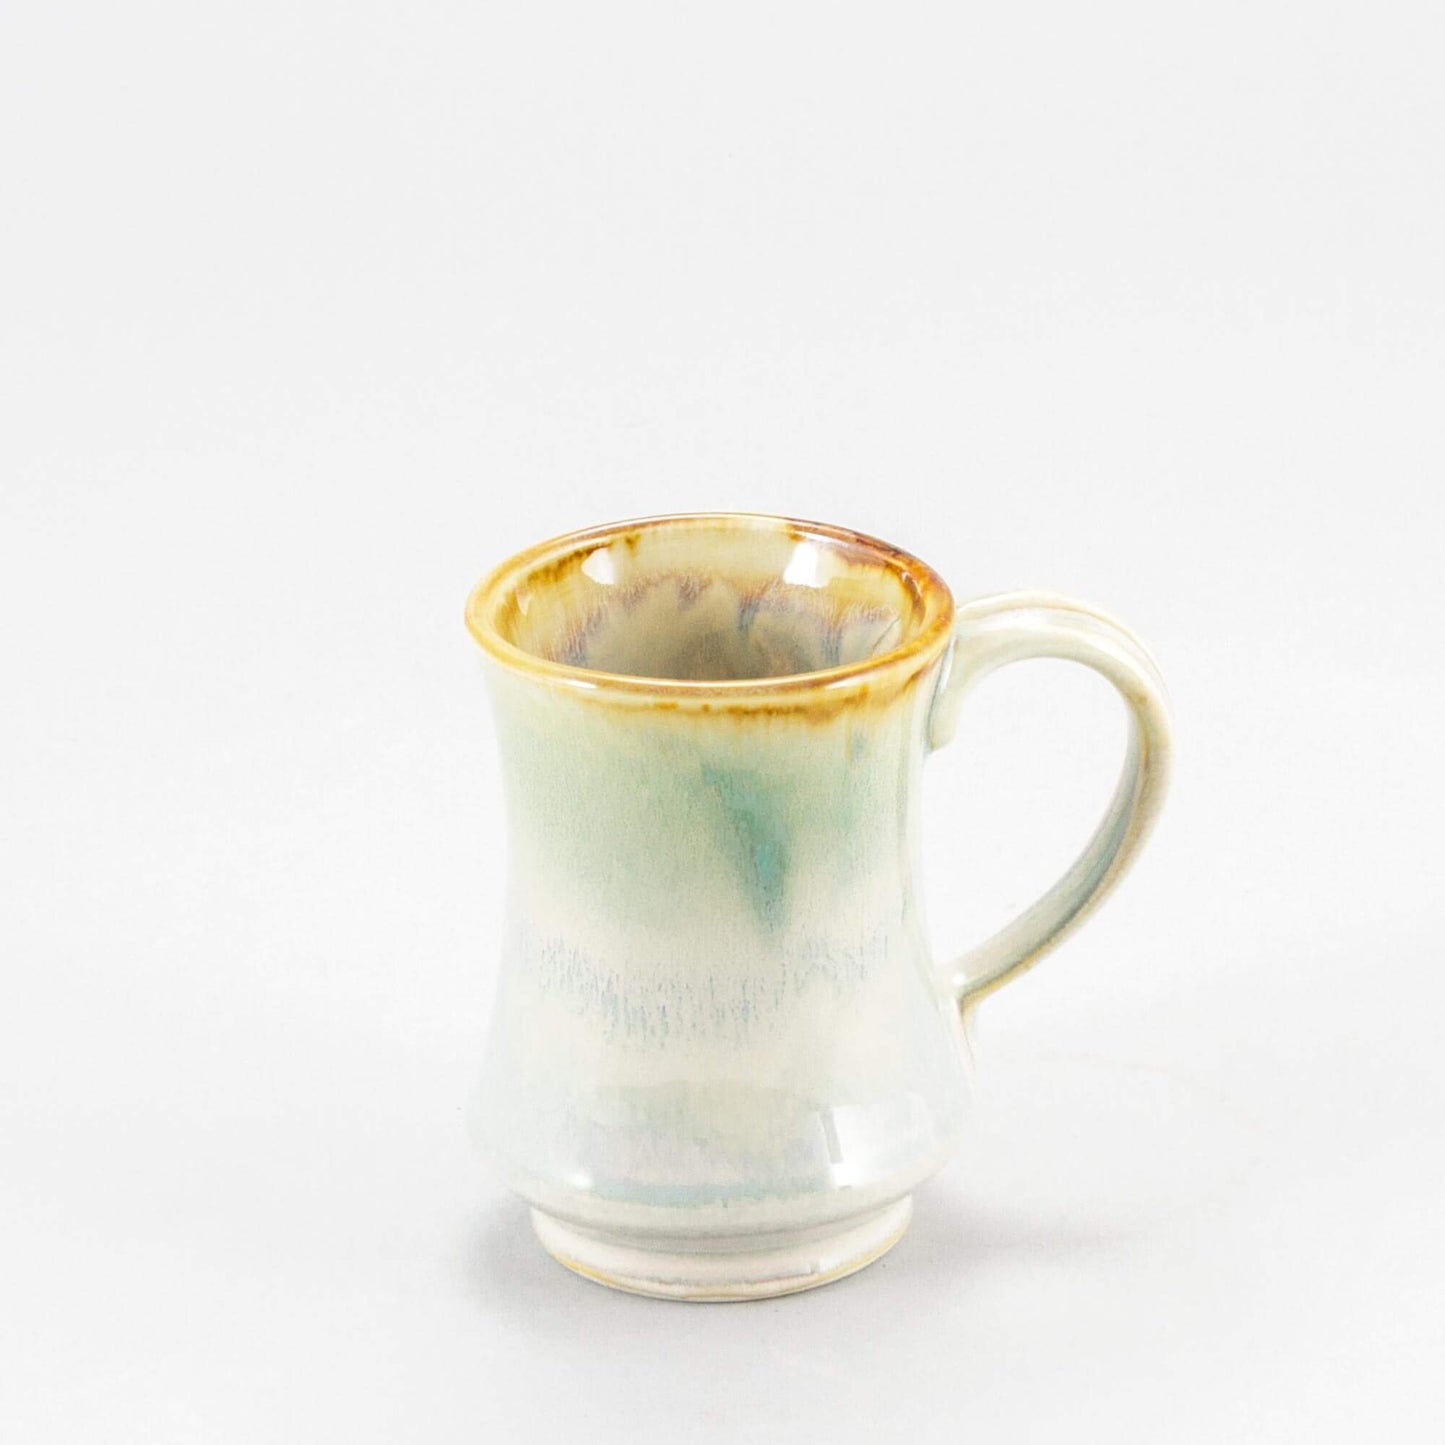 Handmade Pottery Pedestal Mug made by Georgetown Pottery in Maine Ivory & Green